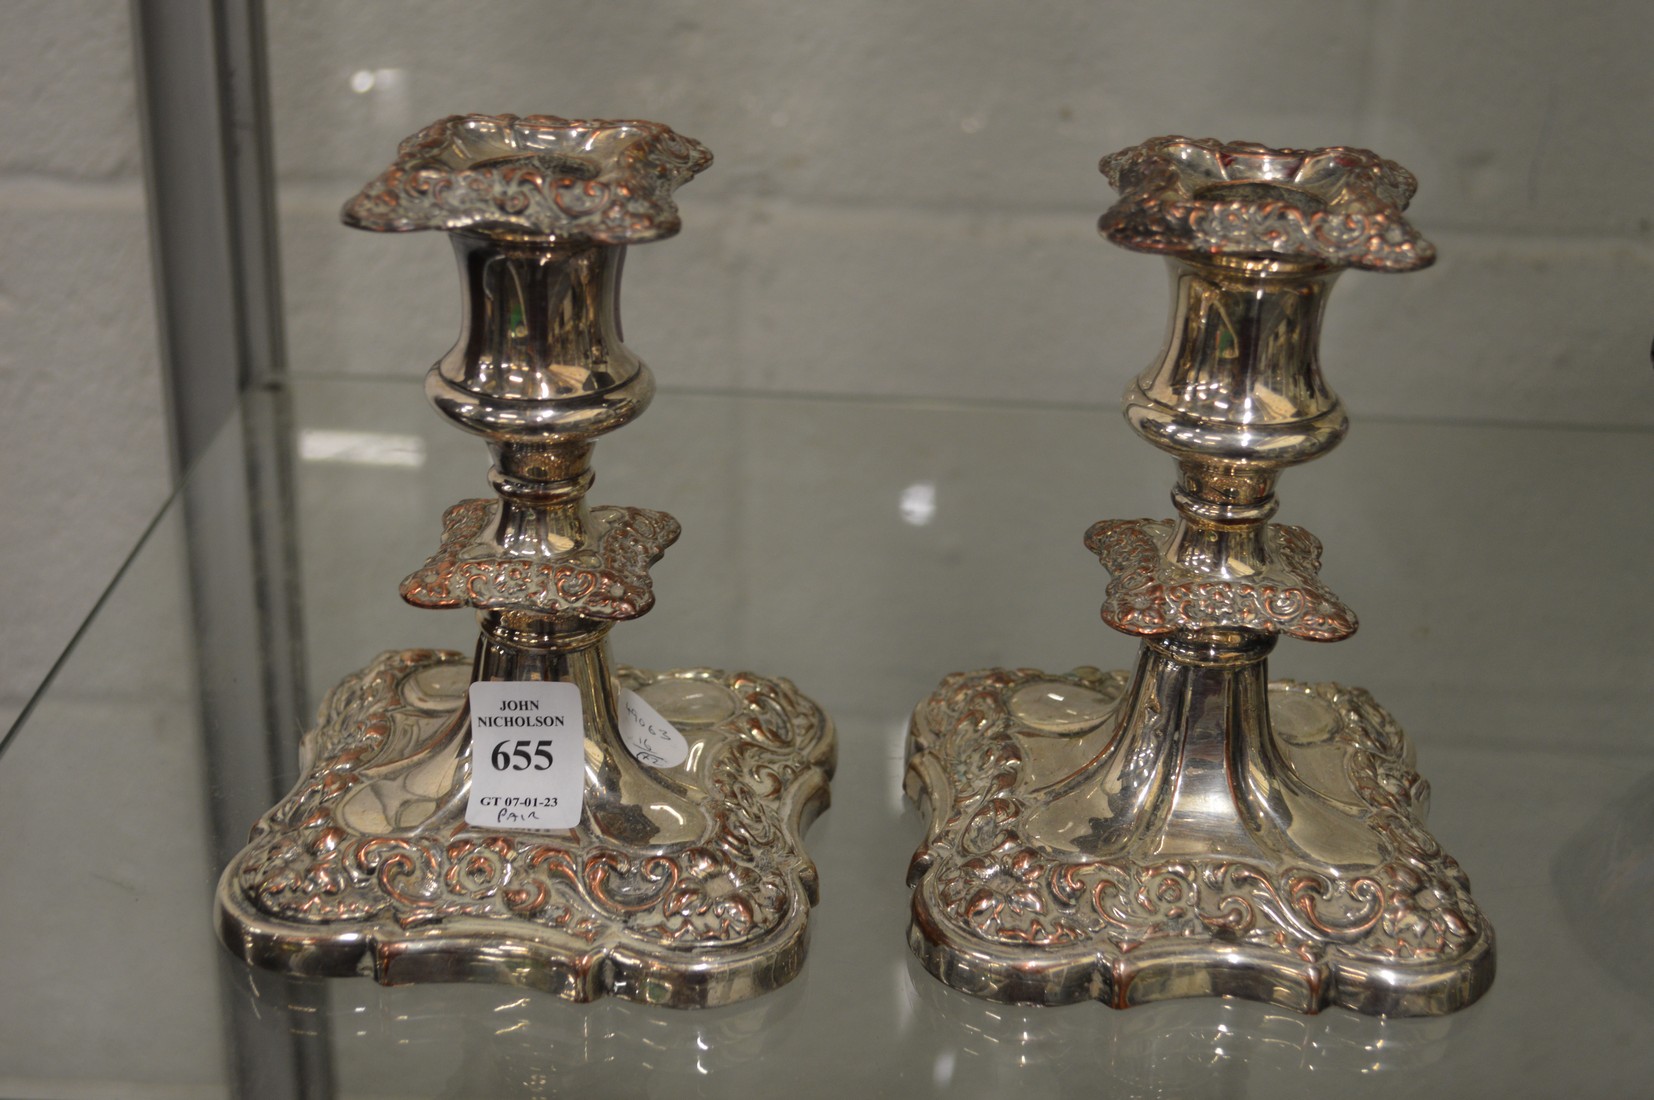 A pair of plated candlesticks.